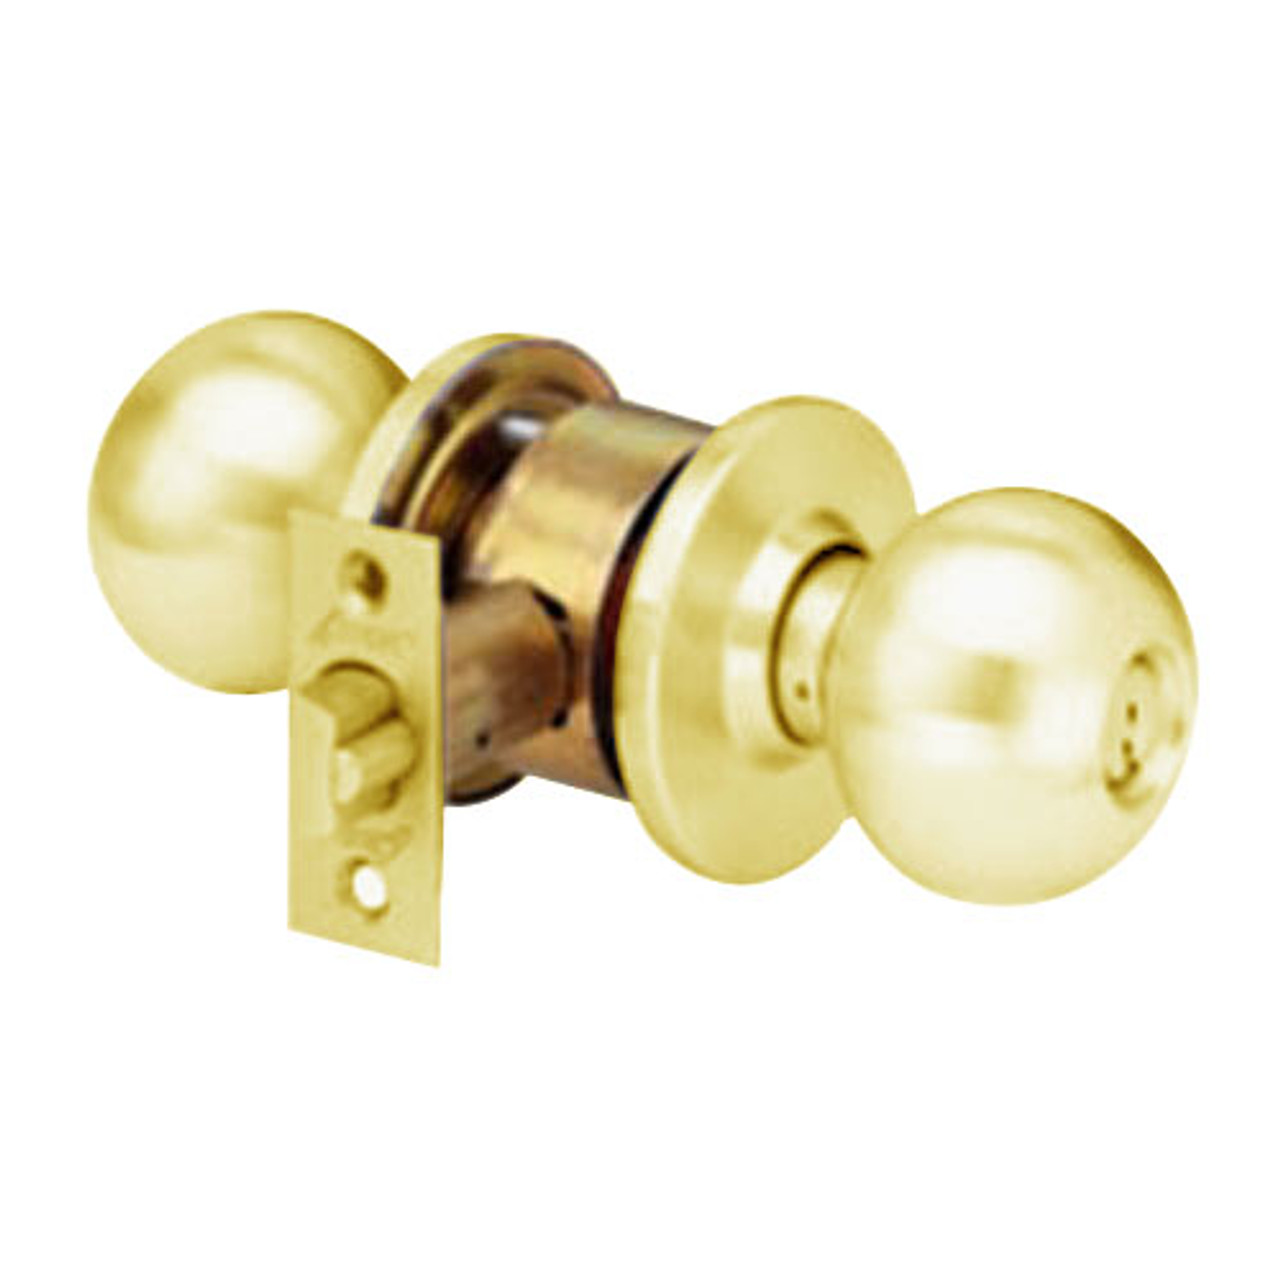 MK14-BD-04 Arrow Lock MK Series Cylindrical Locksets Single Cylinder for Service Station with BD Knob in Satin Brass Finish